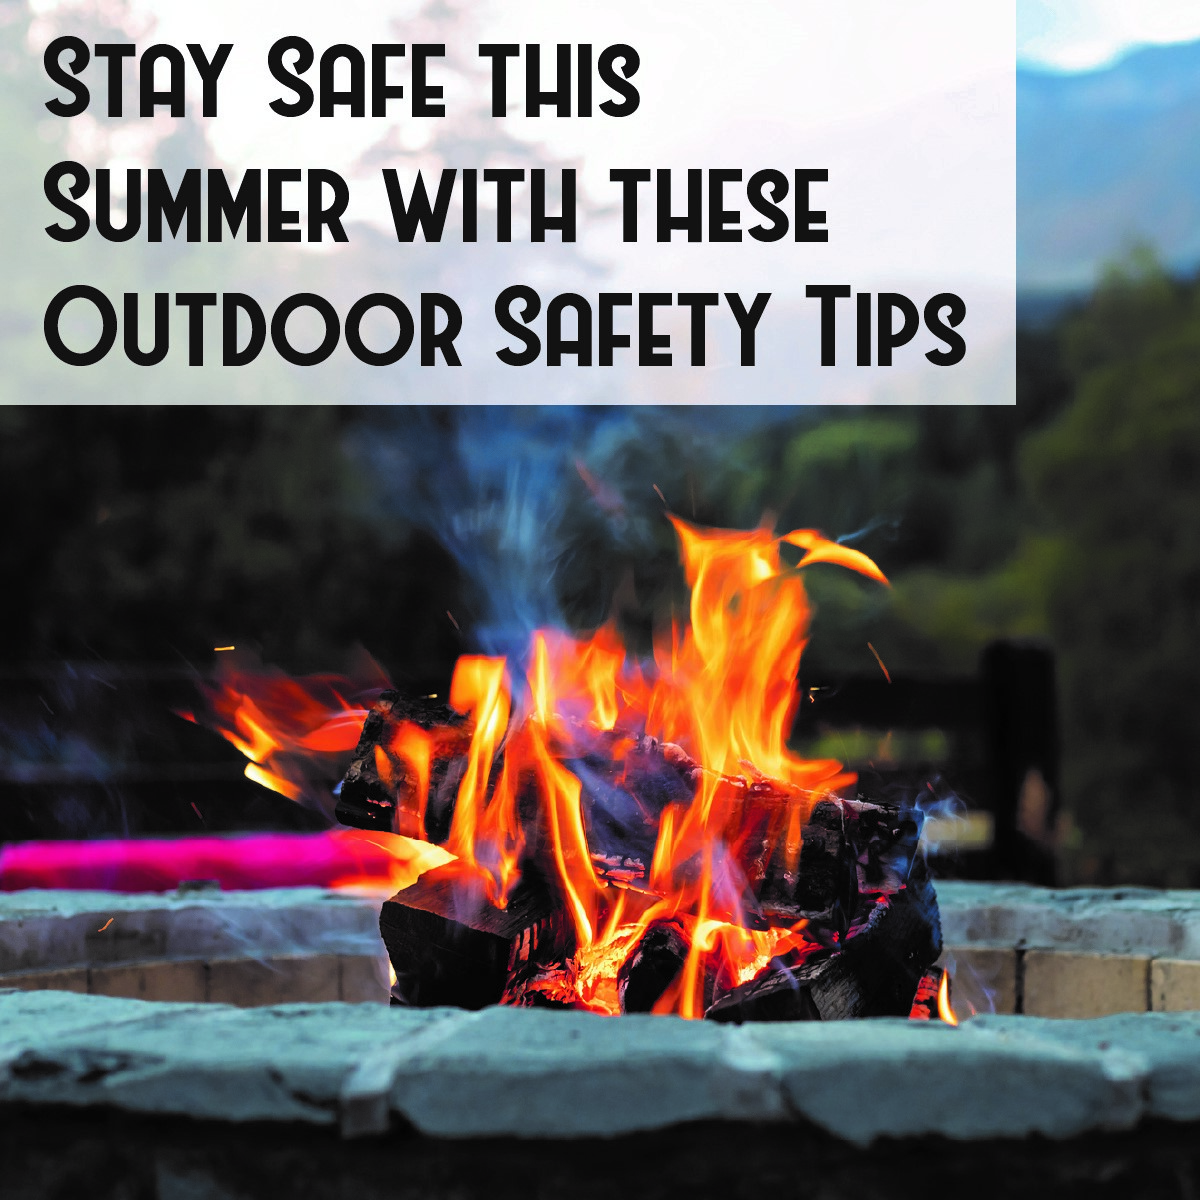 Outdoor Safety Tips